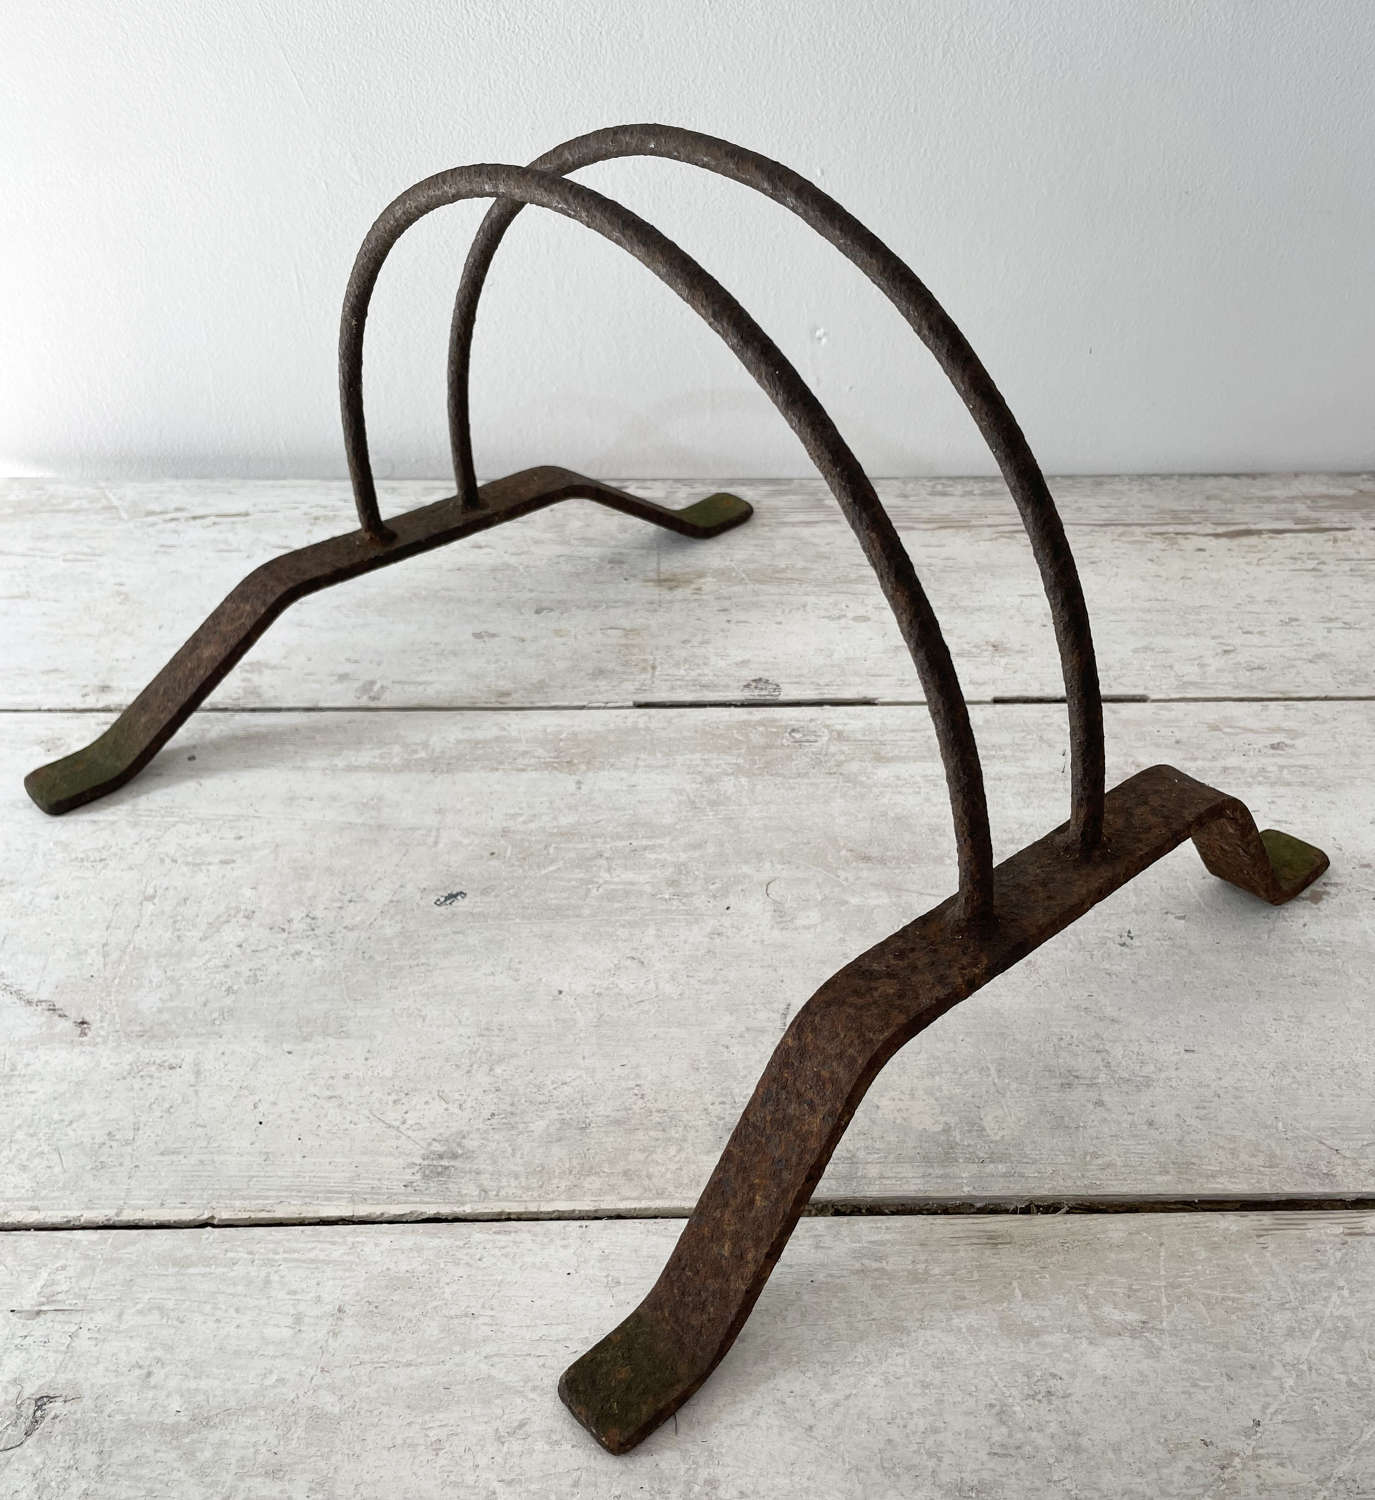 19th century French wrought Iron Bicycle Stand - circa 1890